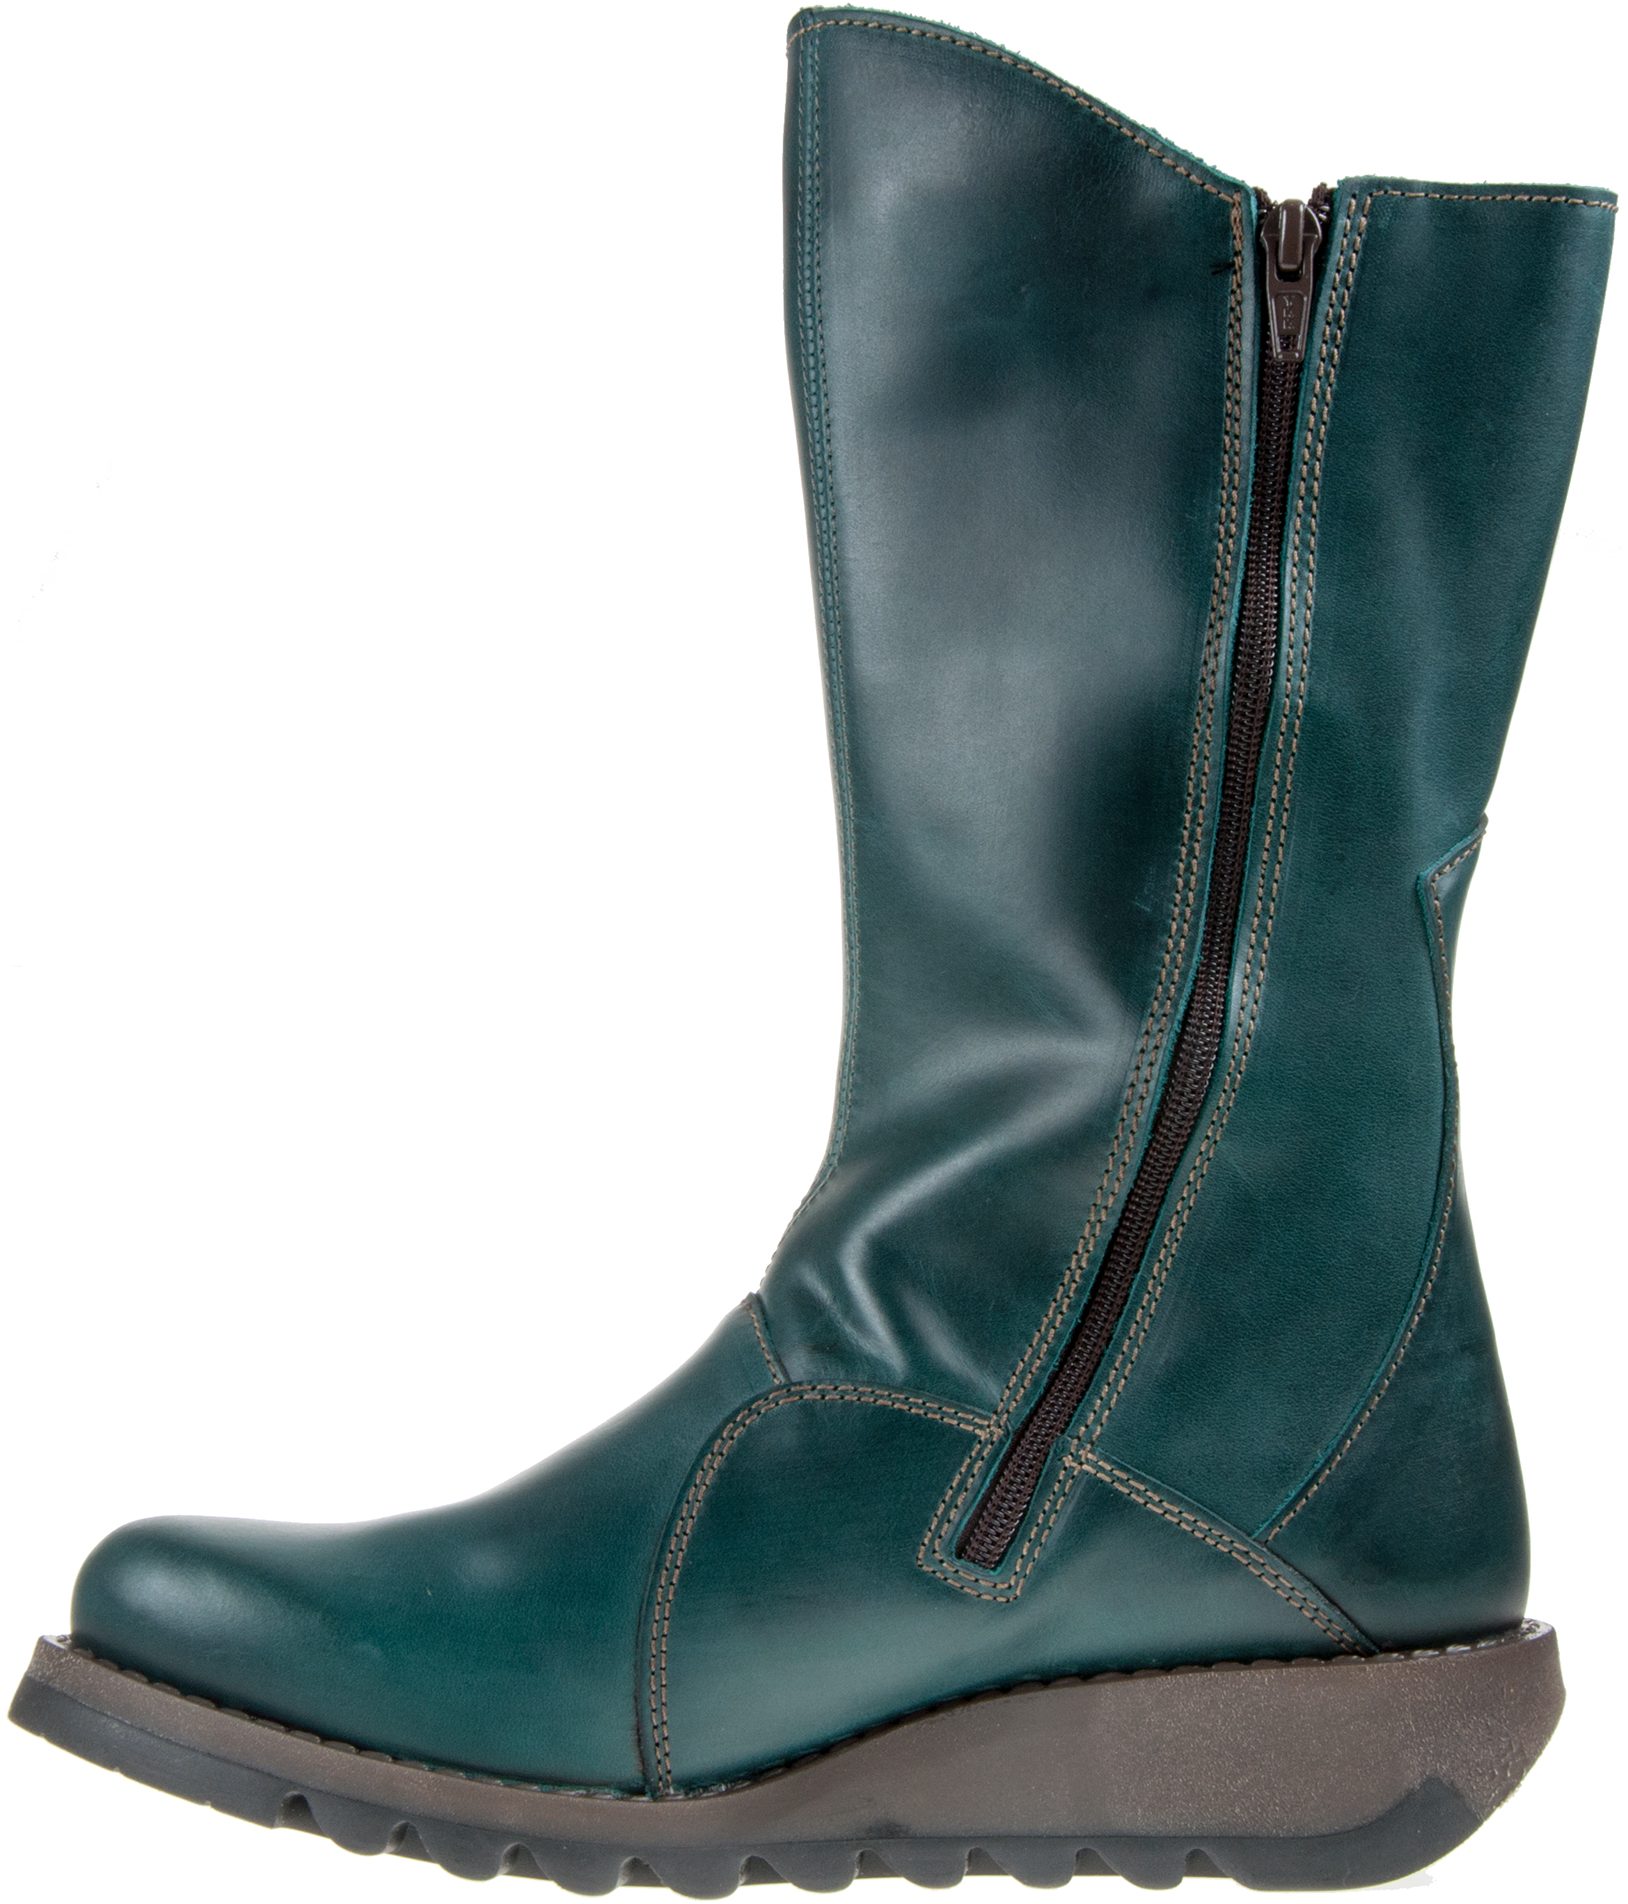 Fly London Mes 2 Petrol P142913 017 - Calf Boots - Humphries Shoes